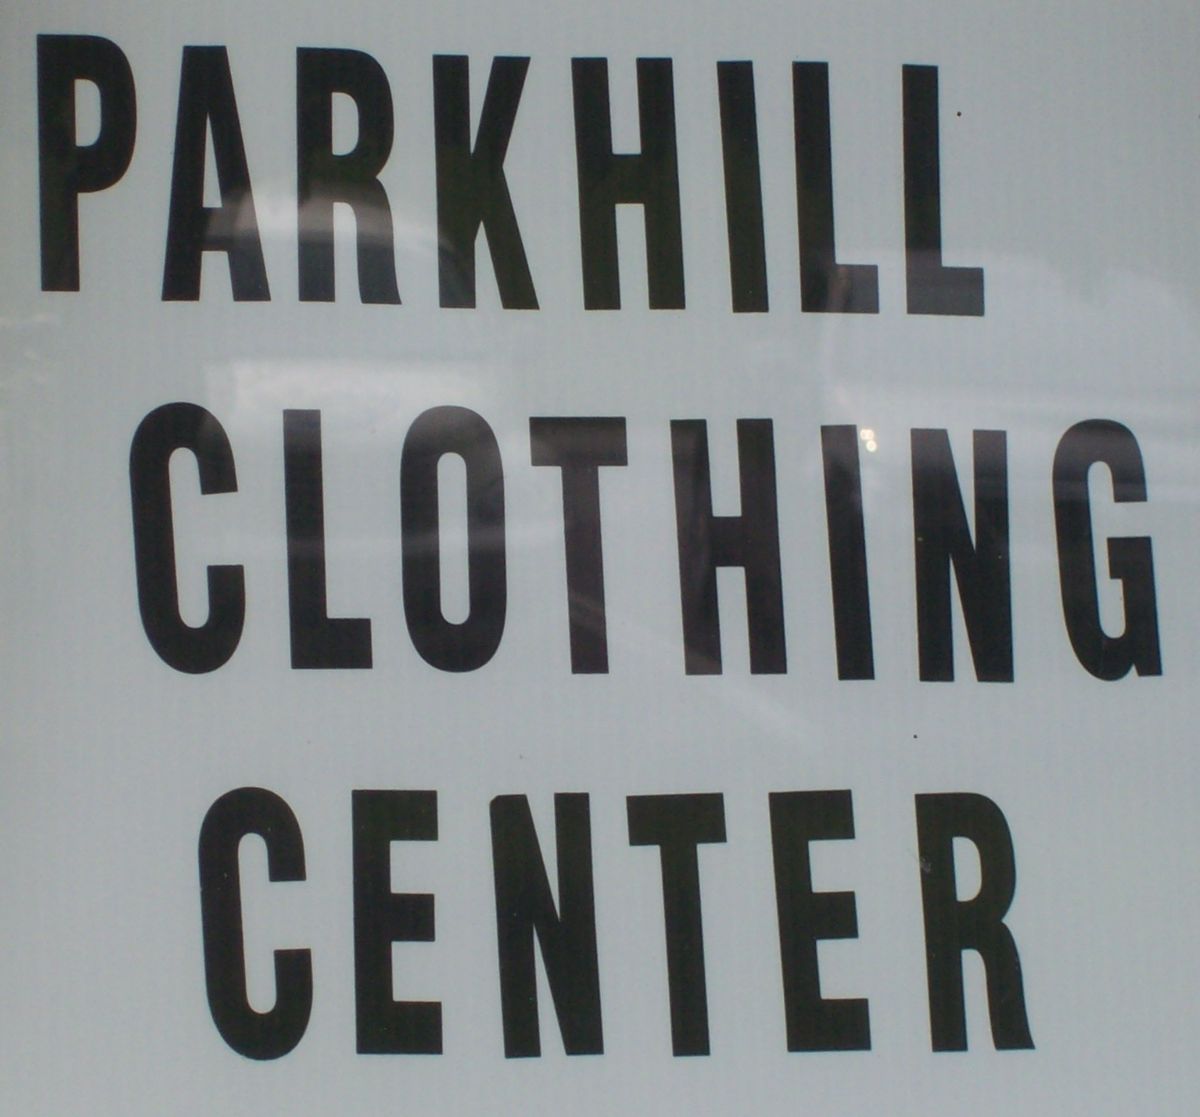 Walden Day at the Park Hill Clothing Center, Friday May 3, 2024 from 5:00pm-7:00pm